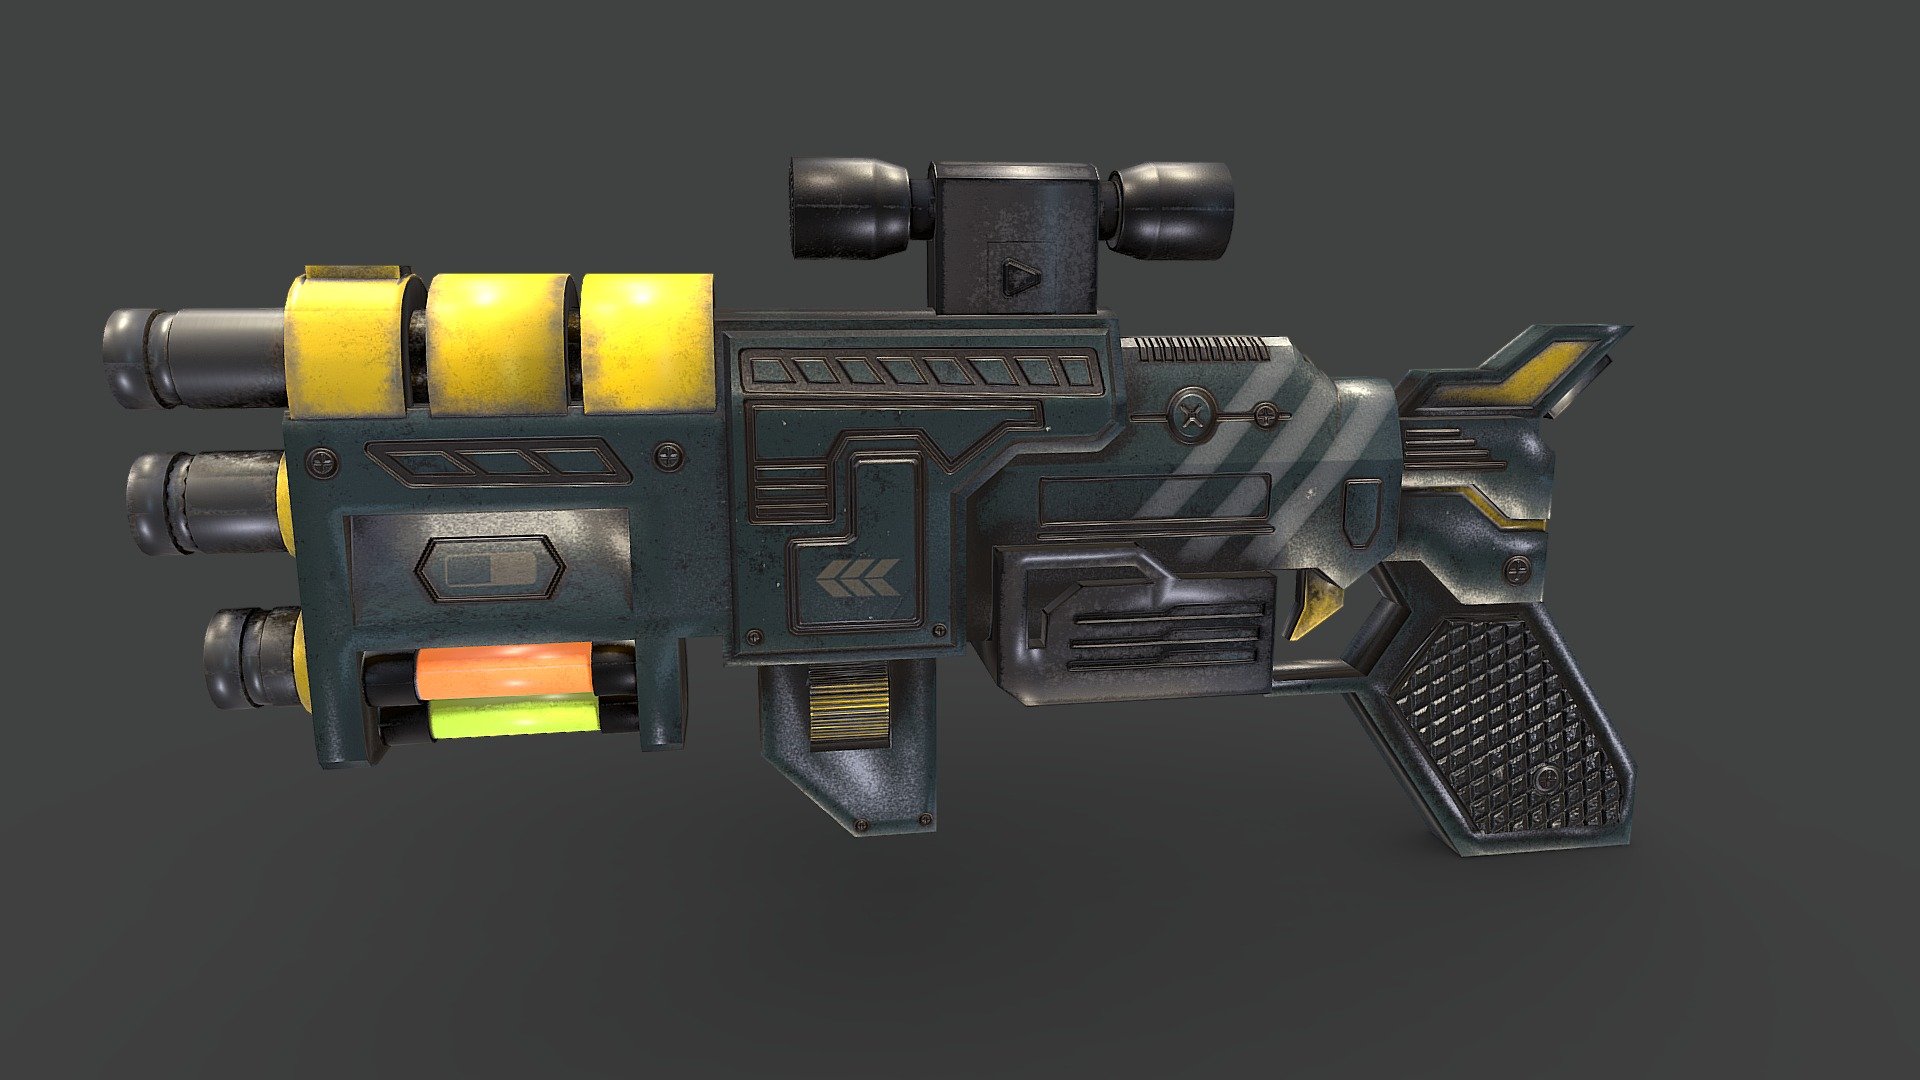 This is 3d model of Sci Fi Concept Ray Gun.
This is realistic 3d model.
This model is made using Autodesk 3DS Max 2021.
All the previews are rendered using Iray Renderer.
This is low poly model and ready to use for game engine.
PBR textures are used in 2048x2048 resolutions.

All the textures and 3ds max files are attached with this.

Polys:       2,889
Vertices:  3,147

This 3d model is available in 5 formats
1. Max
2. Dae
3. Obj &amp; Mtl
4. Fbx
5. 3ds

All this files/formats can be import into any of your favorite software.

If you have any queries, feel free to contact me.

Thanks &amp; Regards,
Artist Swastika Bhadury - Sci Fi Ray Gun - Buy Royalty Free 3D model by swastika (@chinababa) 3d model